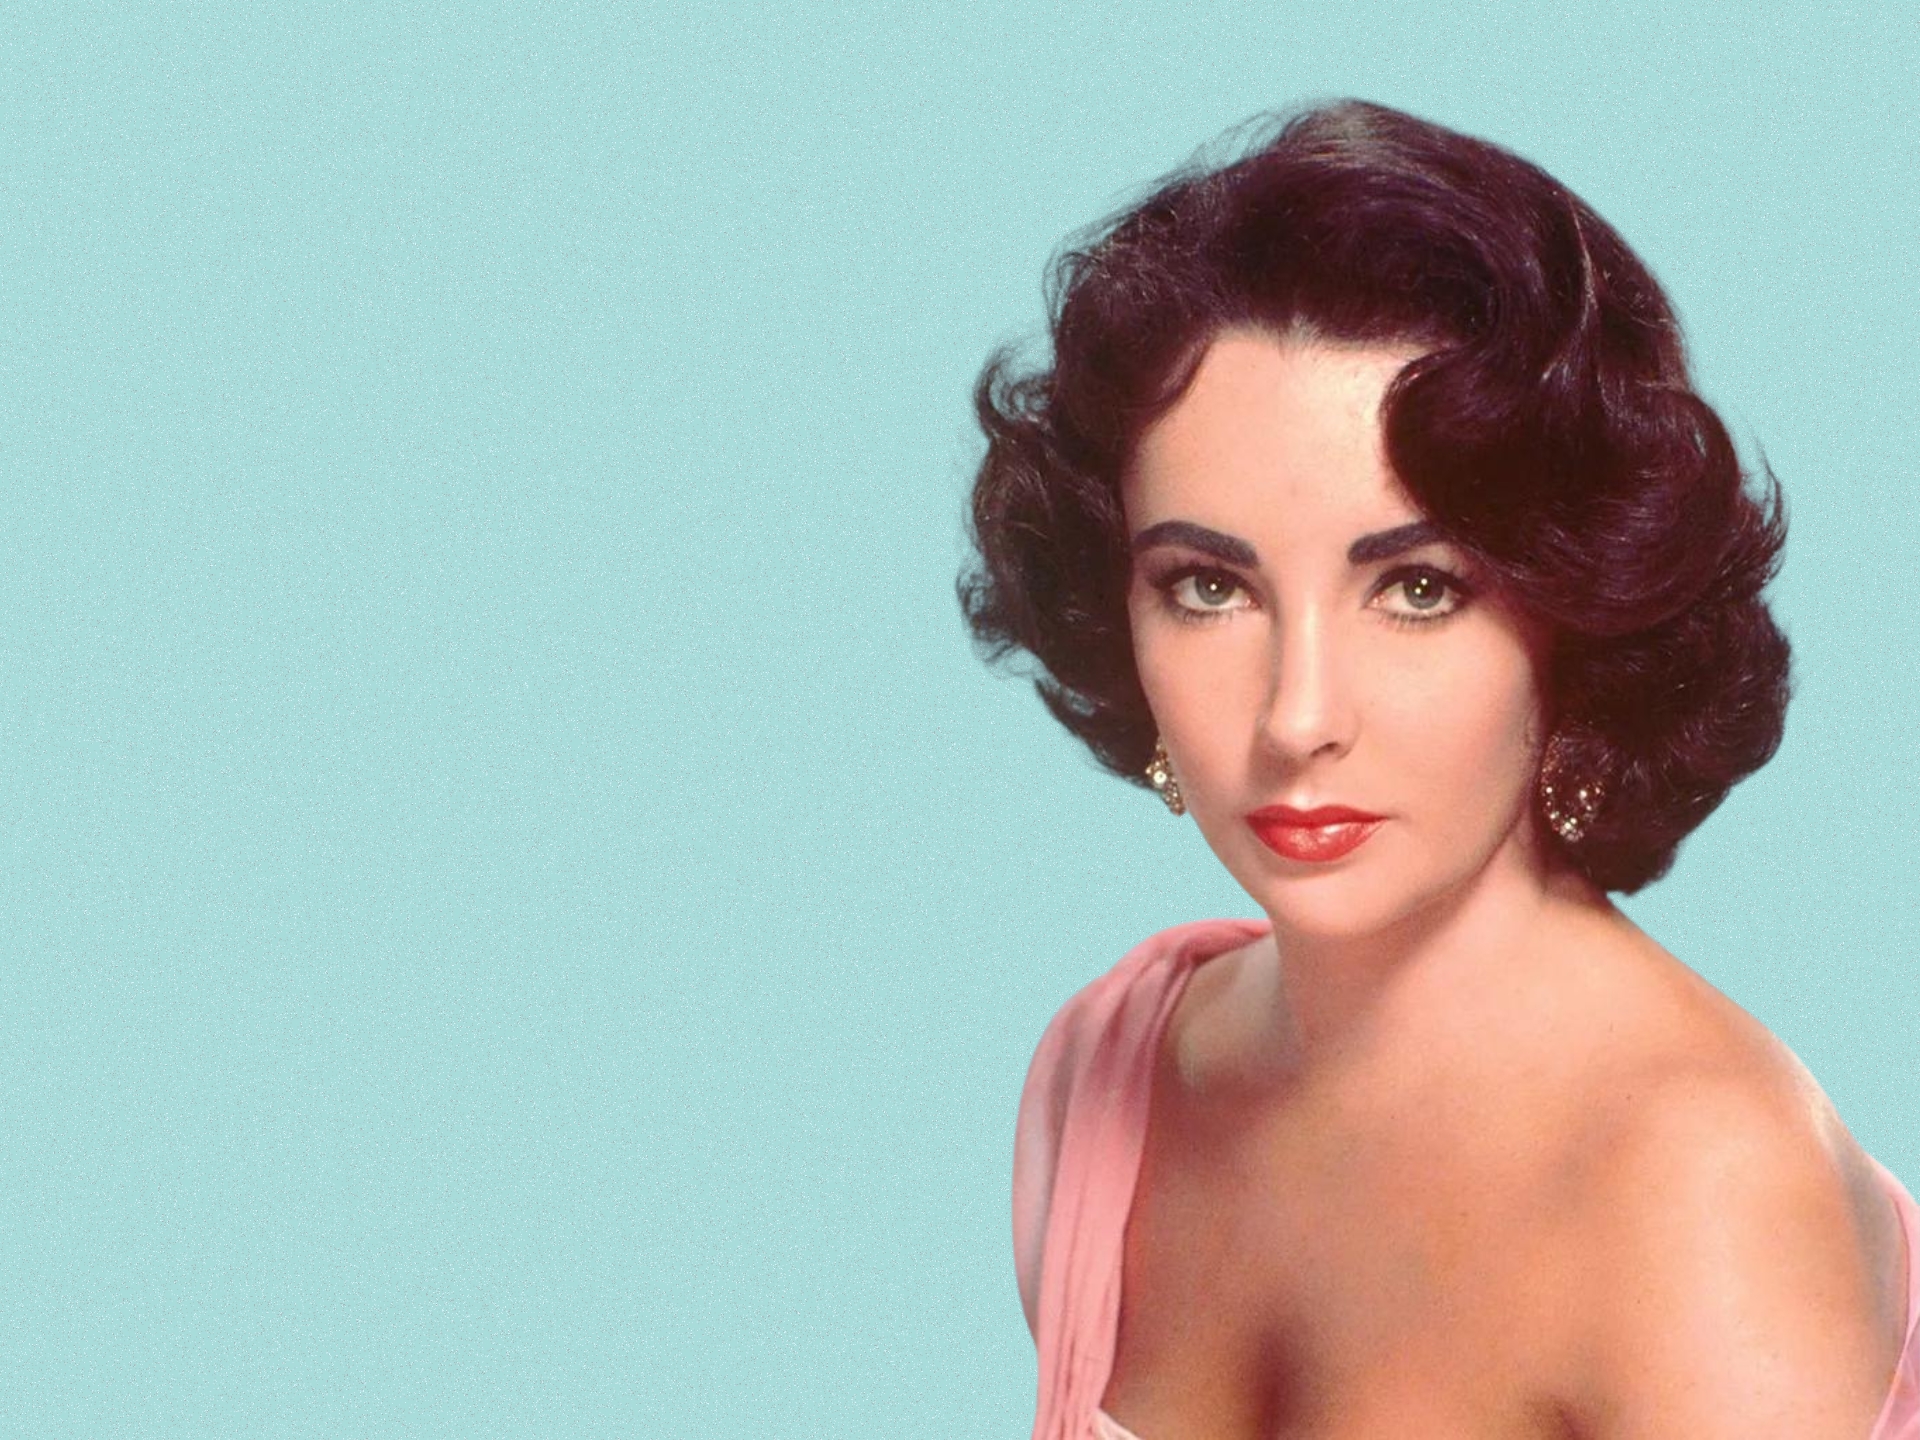 Bring Back Vintage Glam With These 1950s Hairstyles